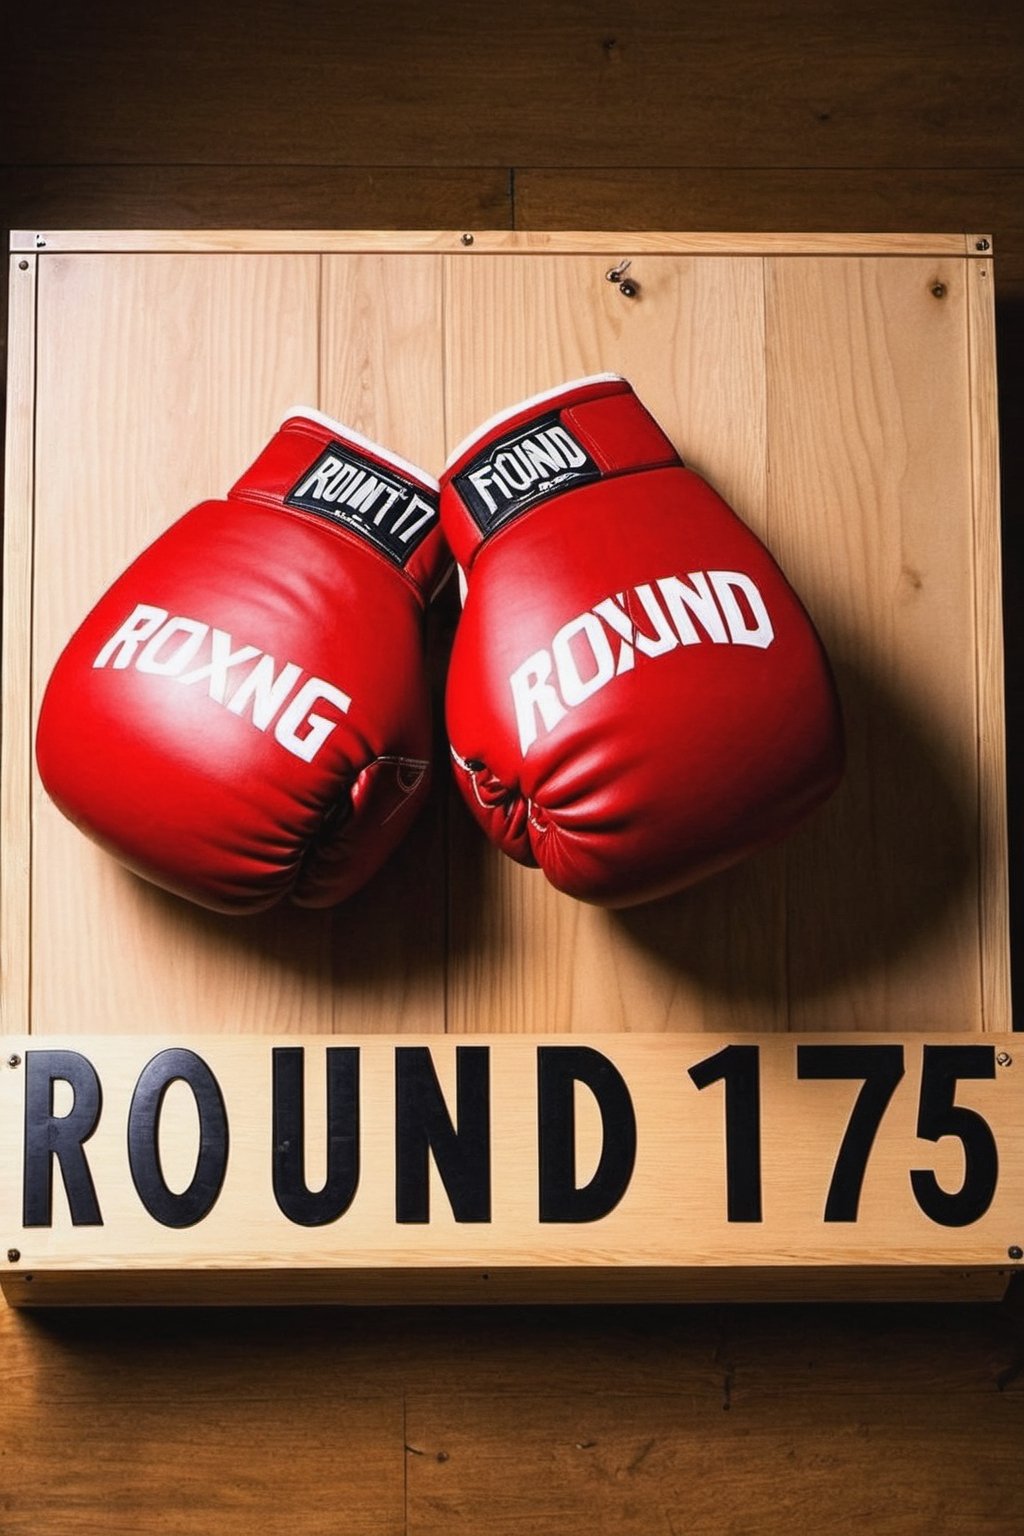 Board with boxing gloves and Text "Round 175" Text